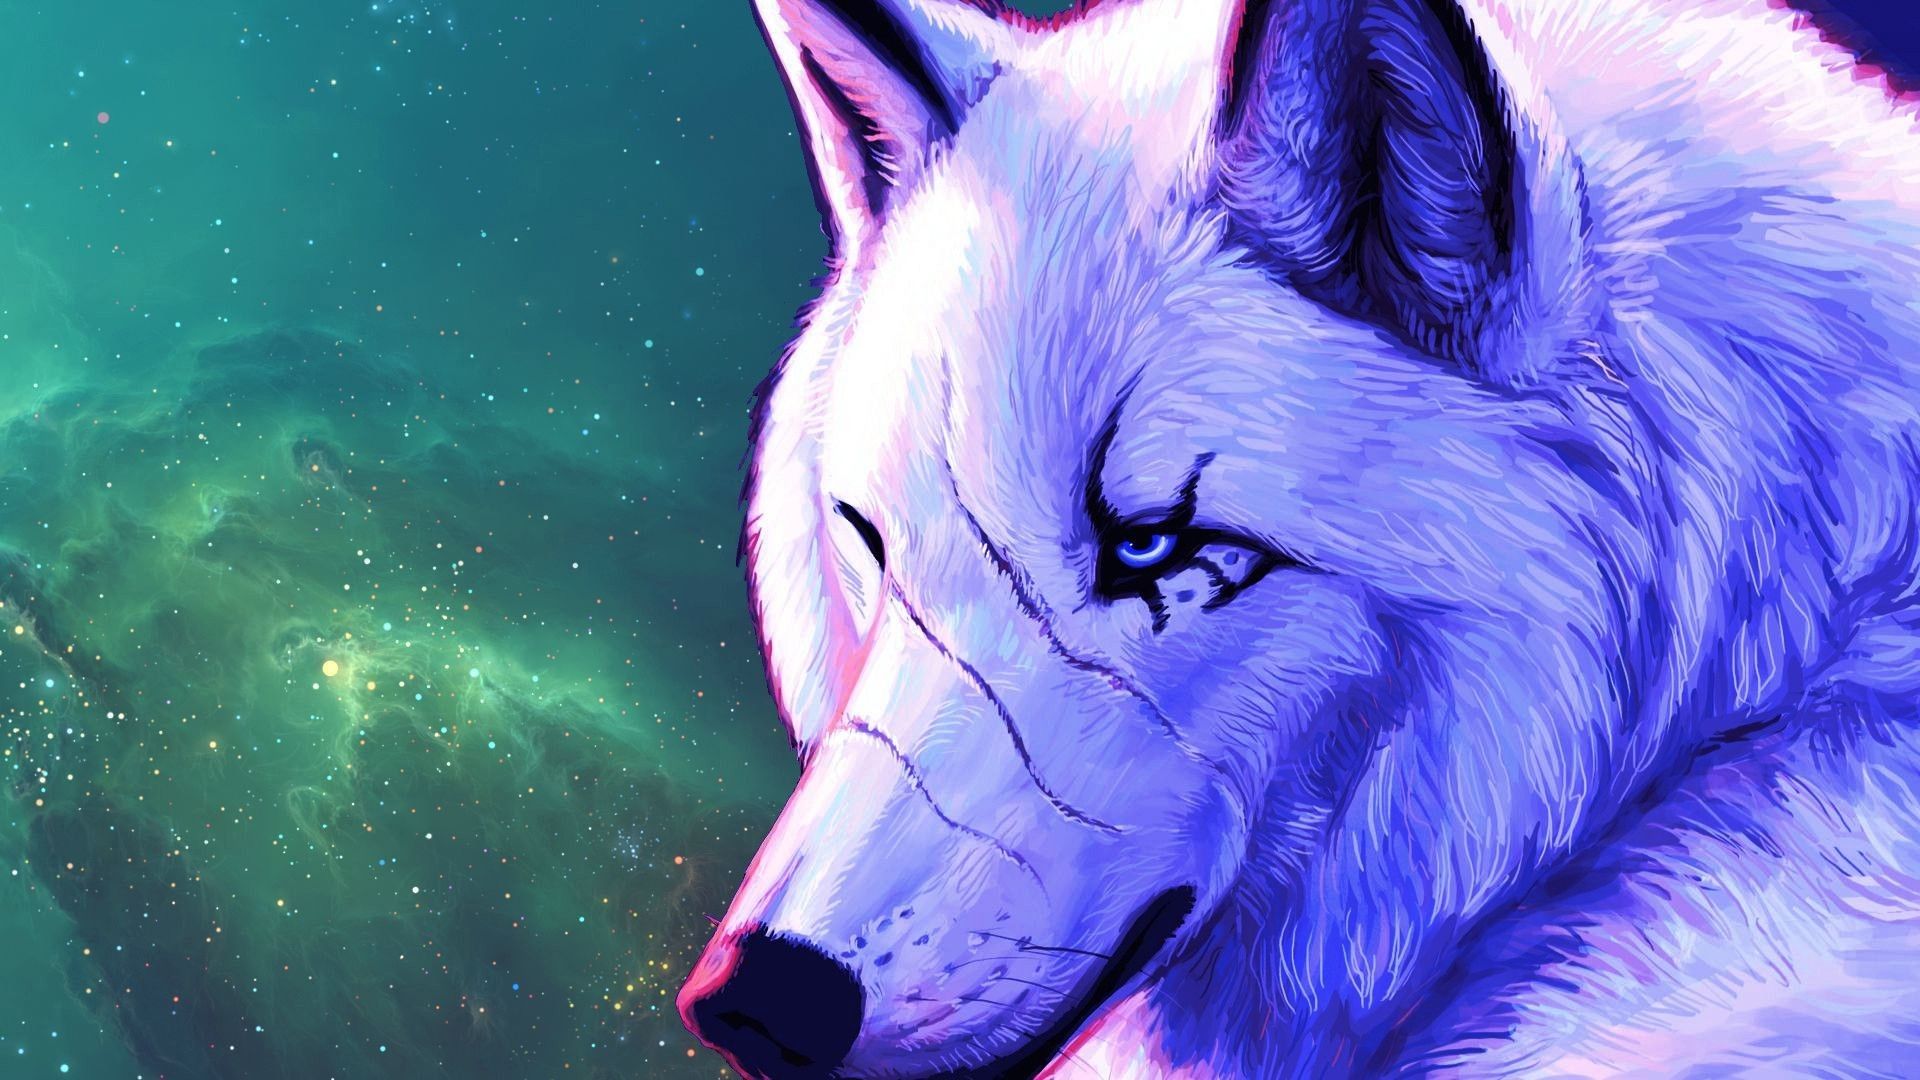 Galaxy Anime Wolves Wallpaper